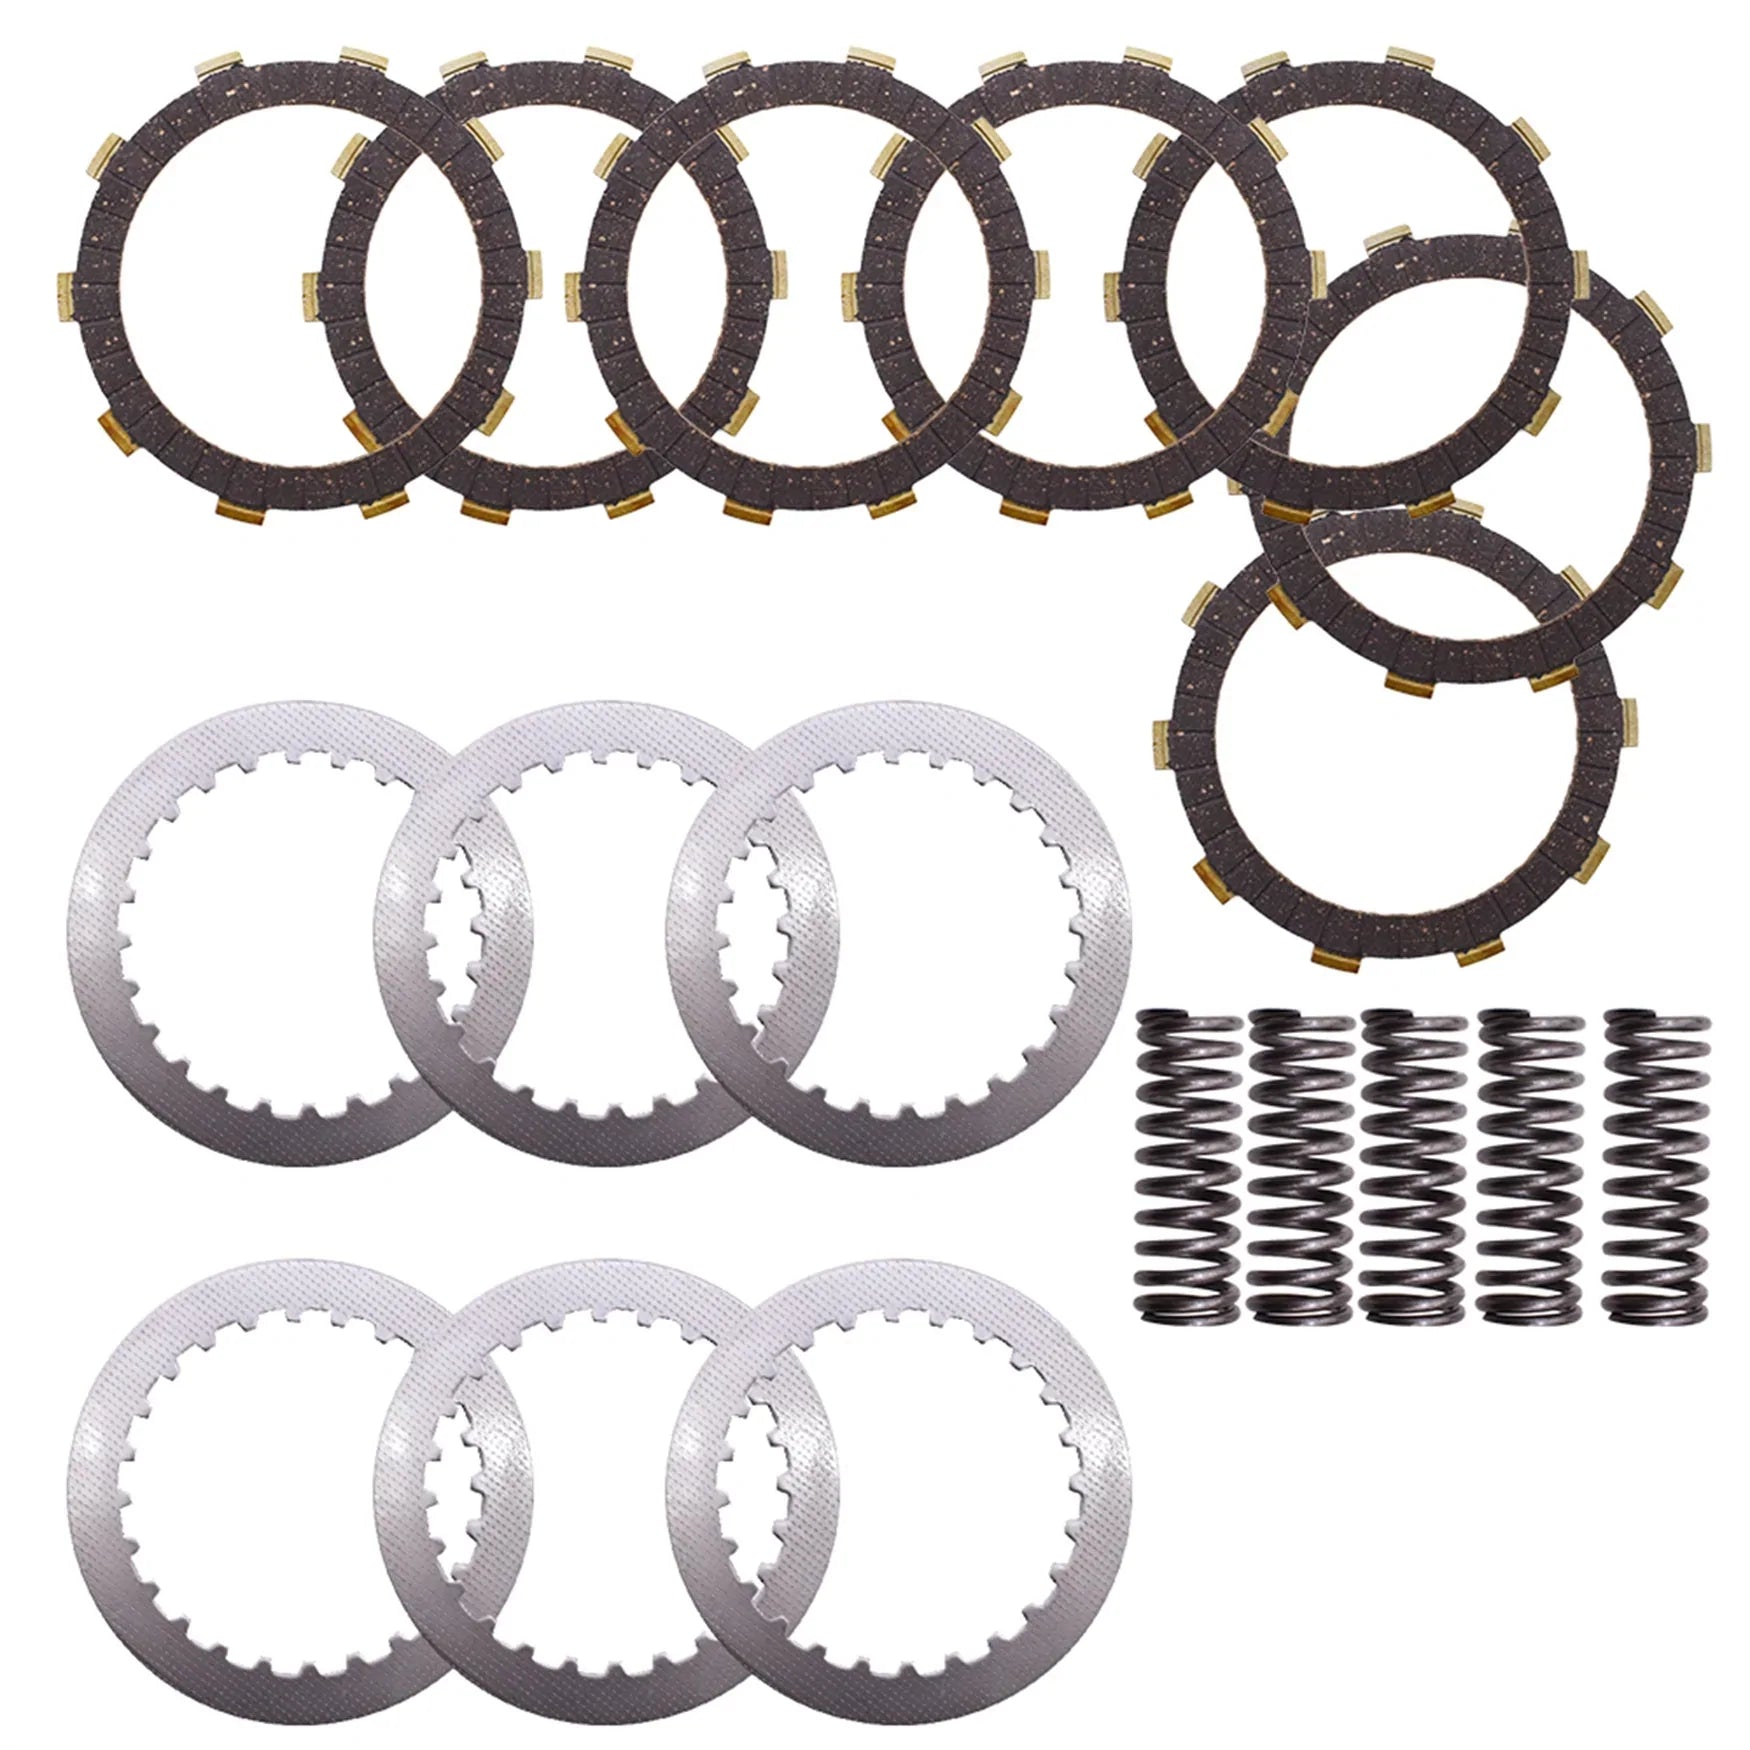 Heavy Duty Clutch Kit with Springs Replacement for Honda TRX400EX TRX 400EX 400X 1999-2014 LAB WORK MOTO